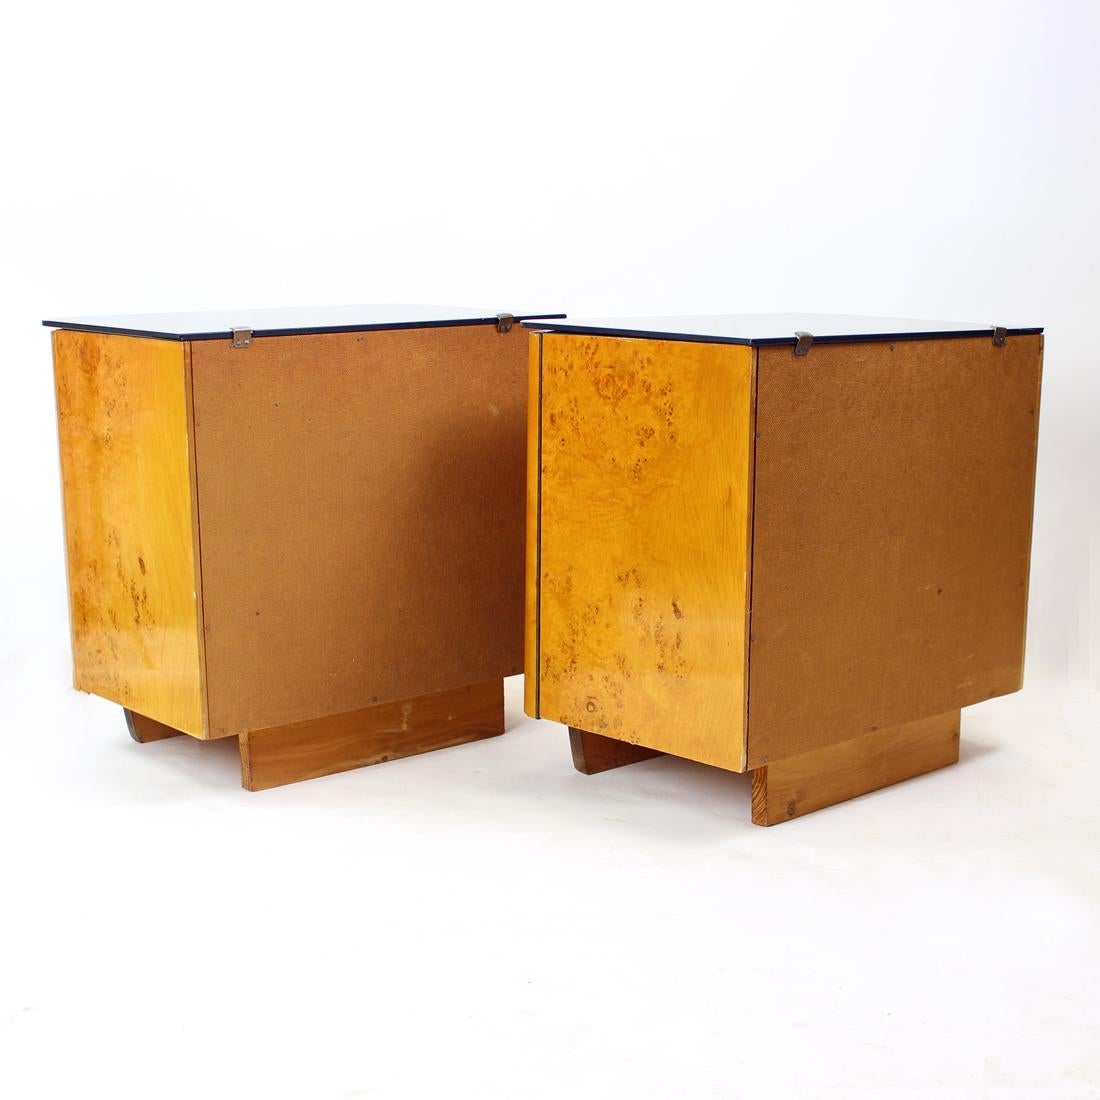 Set of Two Bedside Tables in Wood & Glass, Czechoslovakia, 1940s For Sale 4